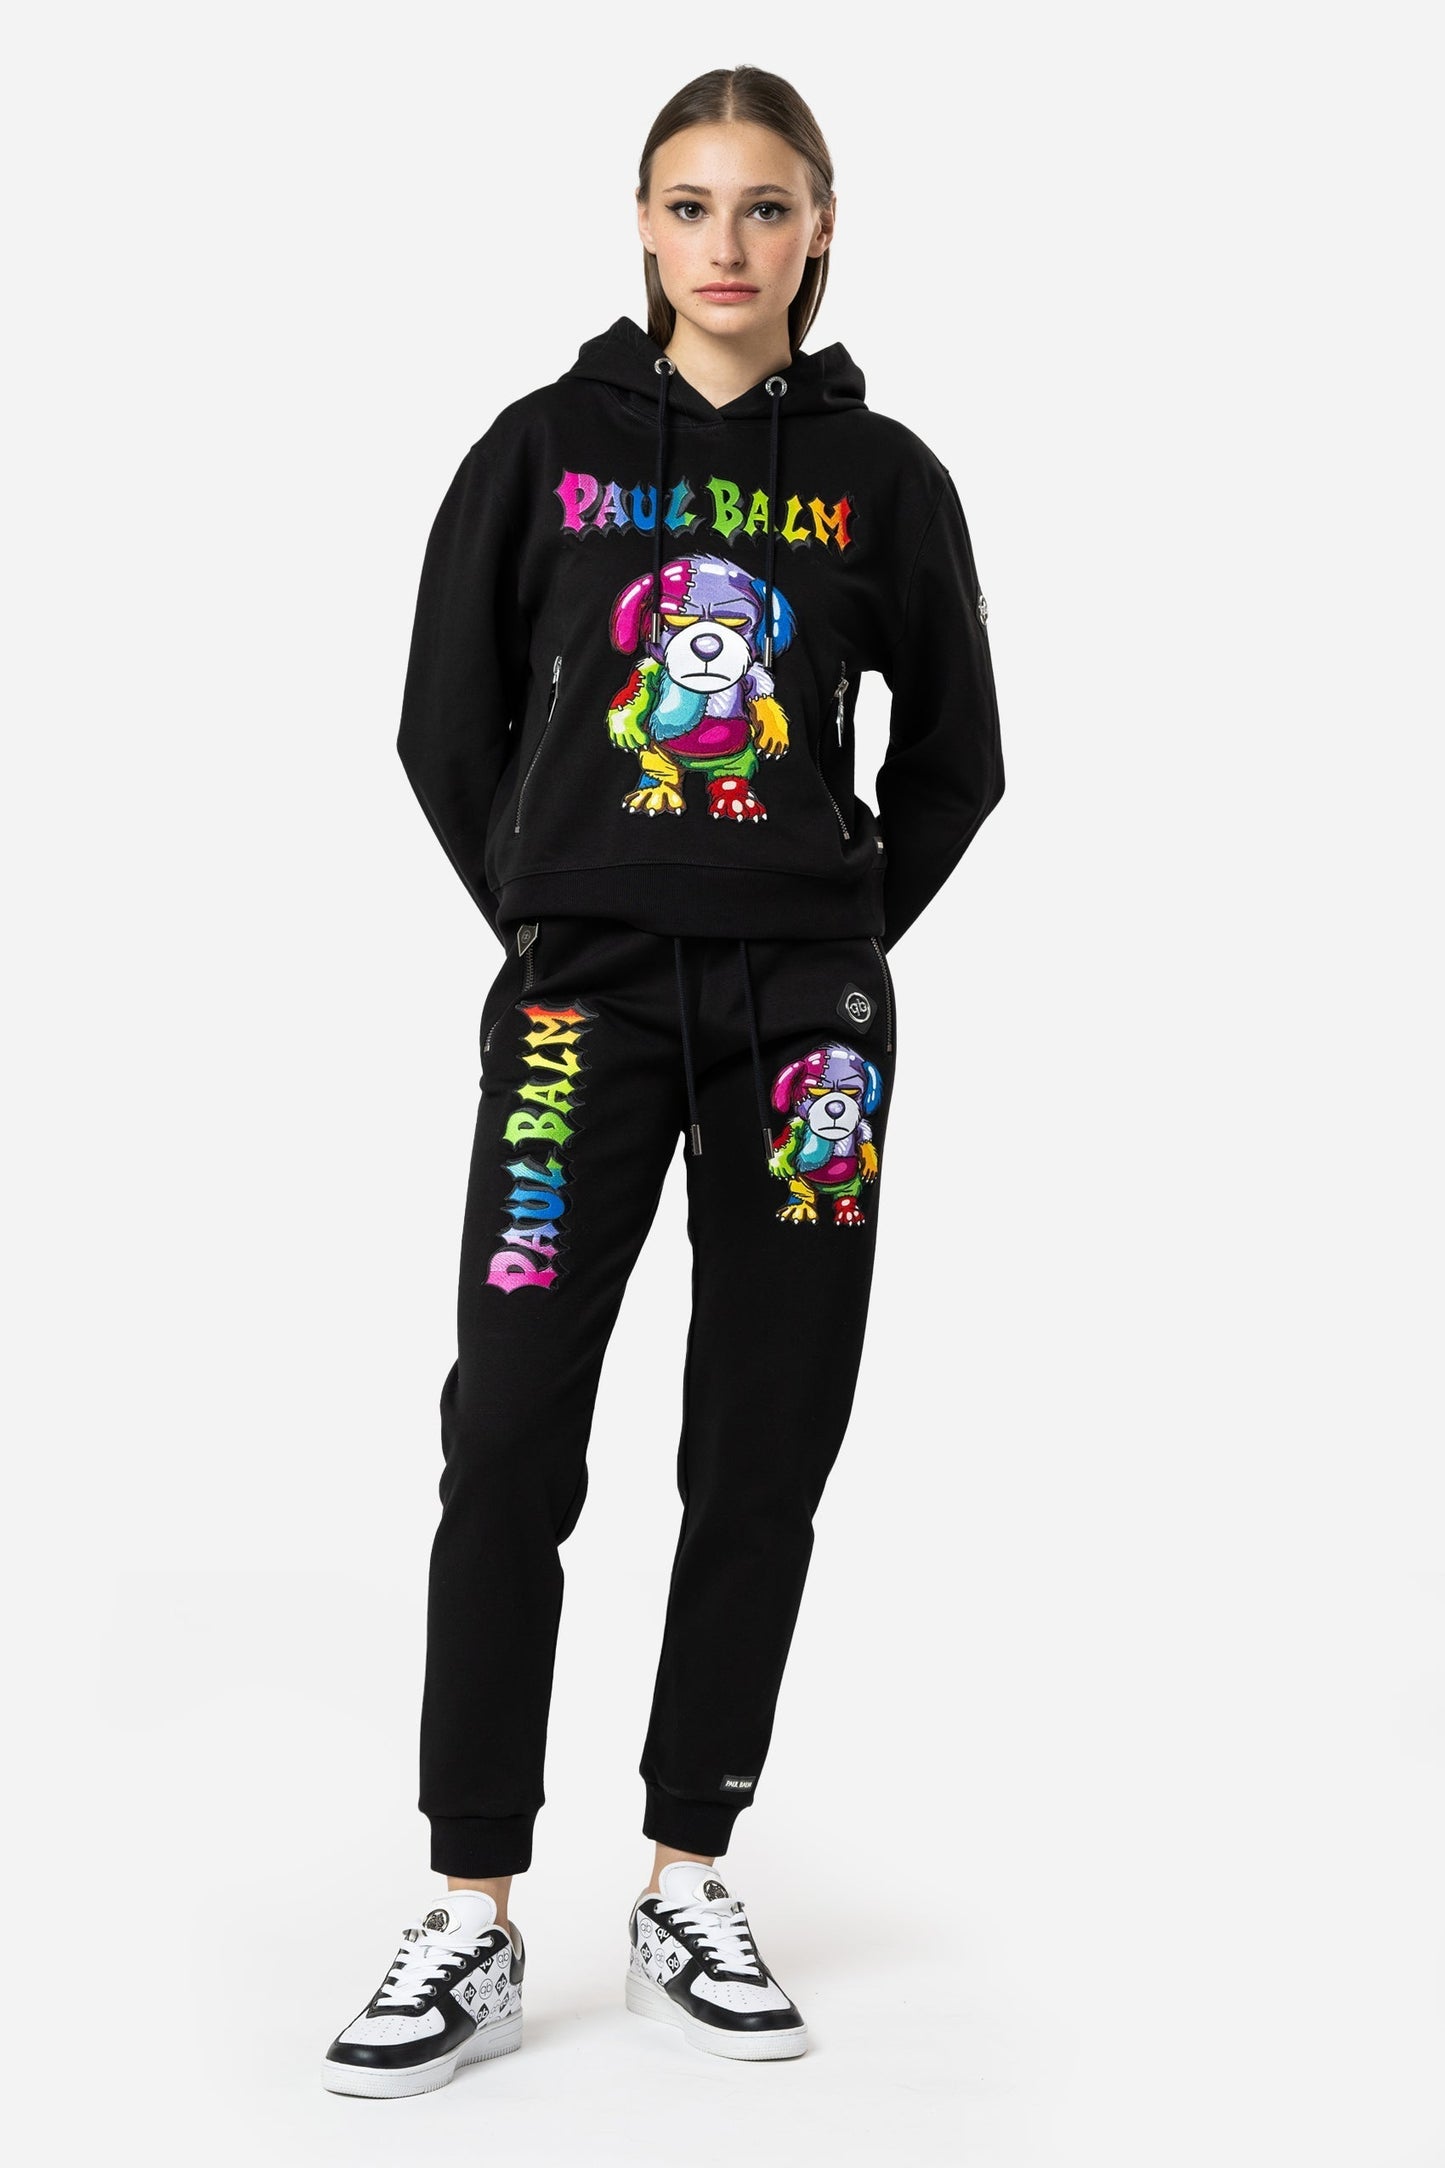 Embroidered Rainbow Teddy Set - Limited to 300 - PAUL BALM WORLD